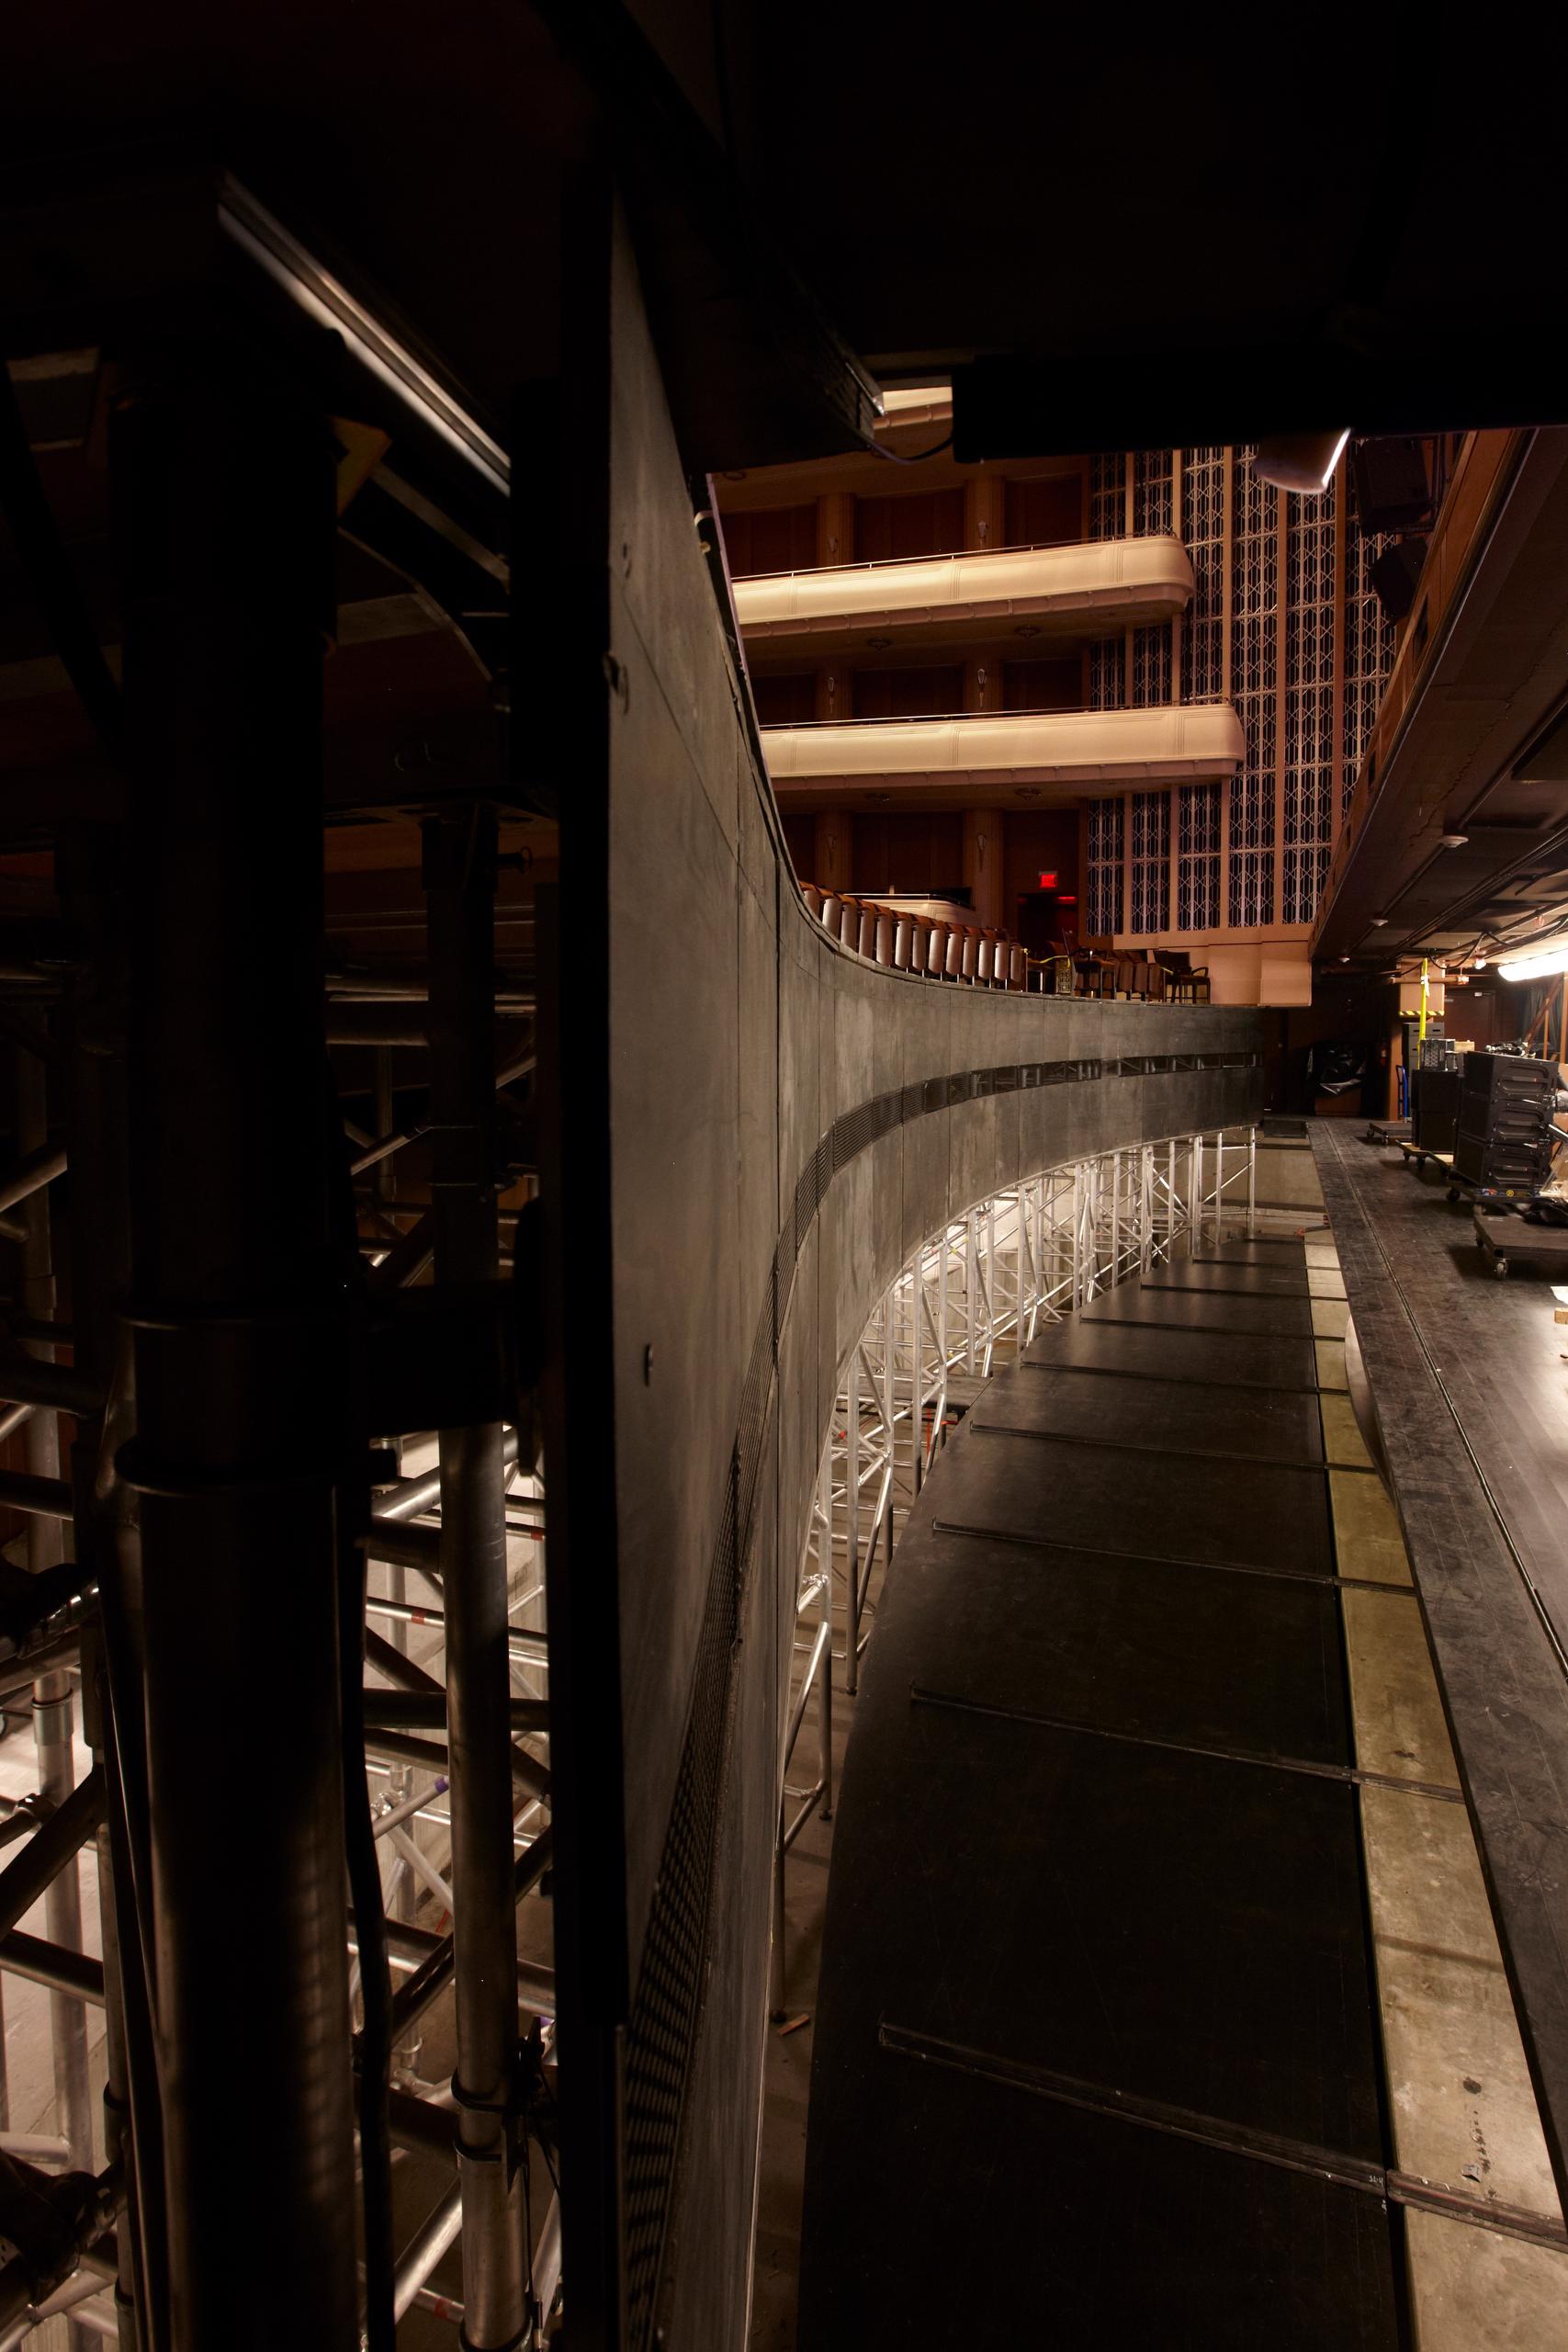 SMITH CENTER FOR THE PERFORMING ARTS - Project Image 6